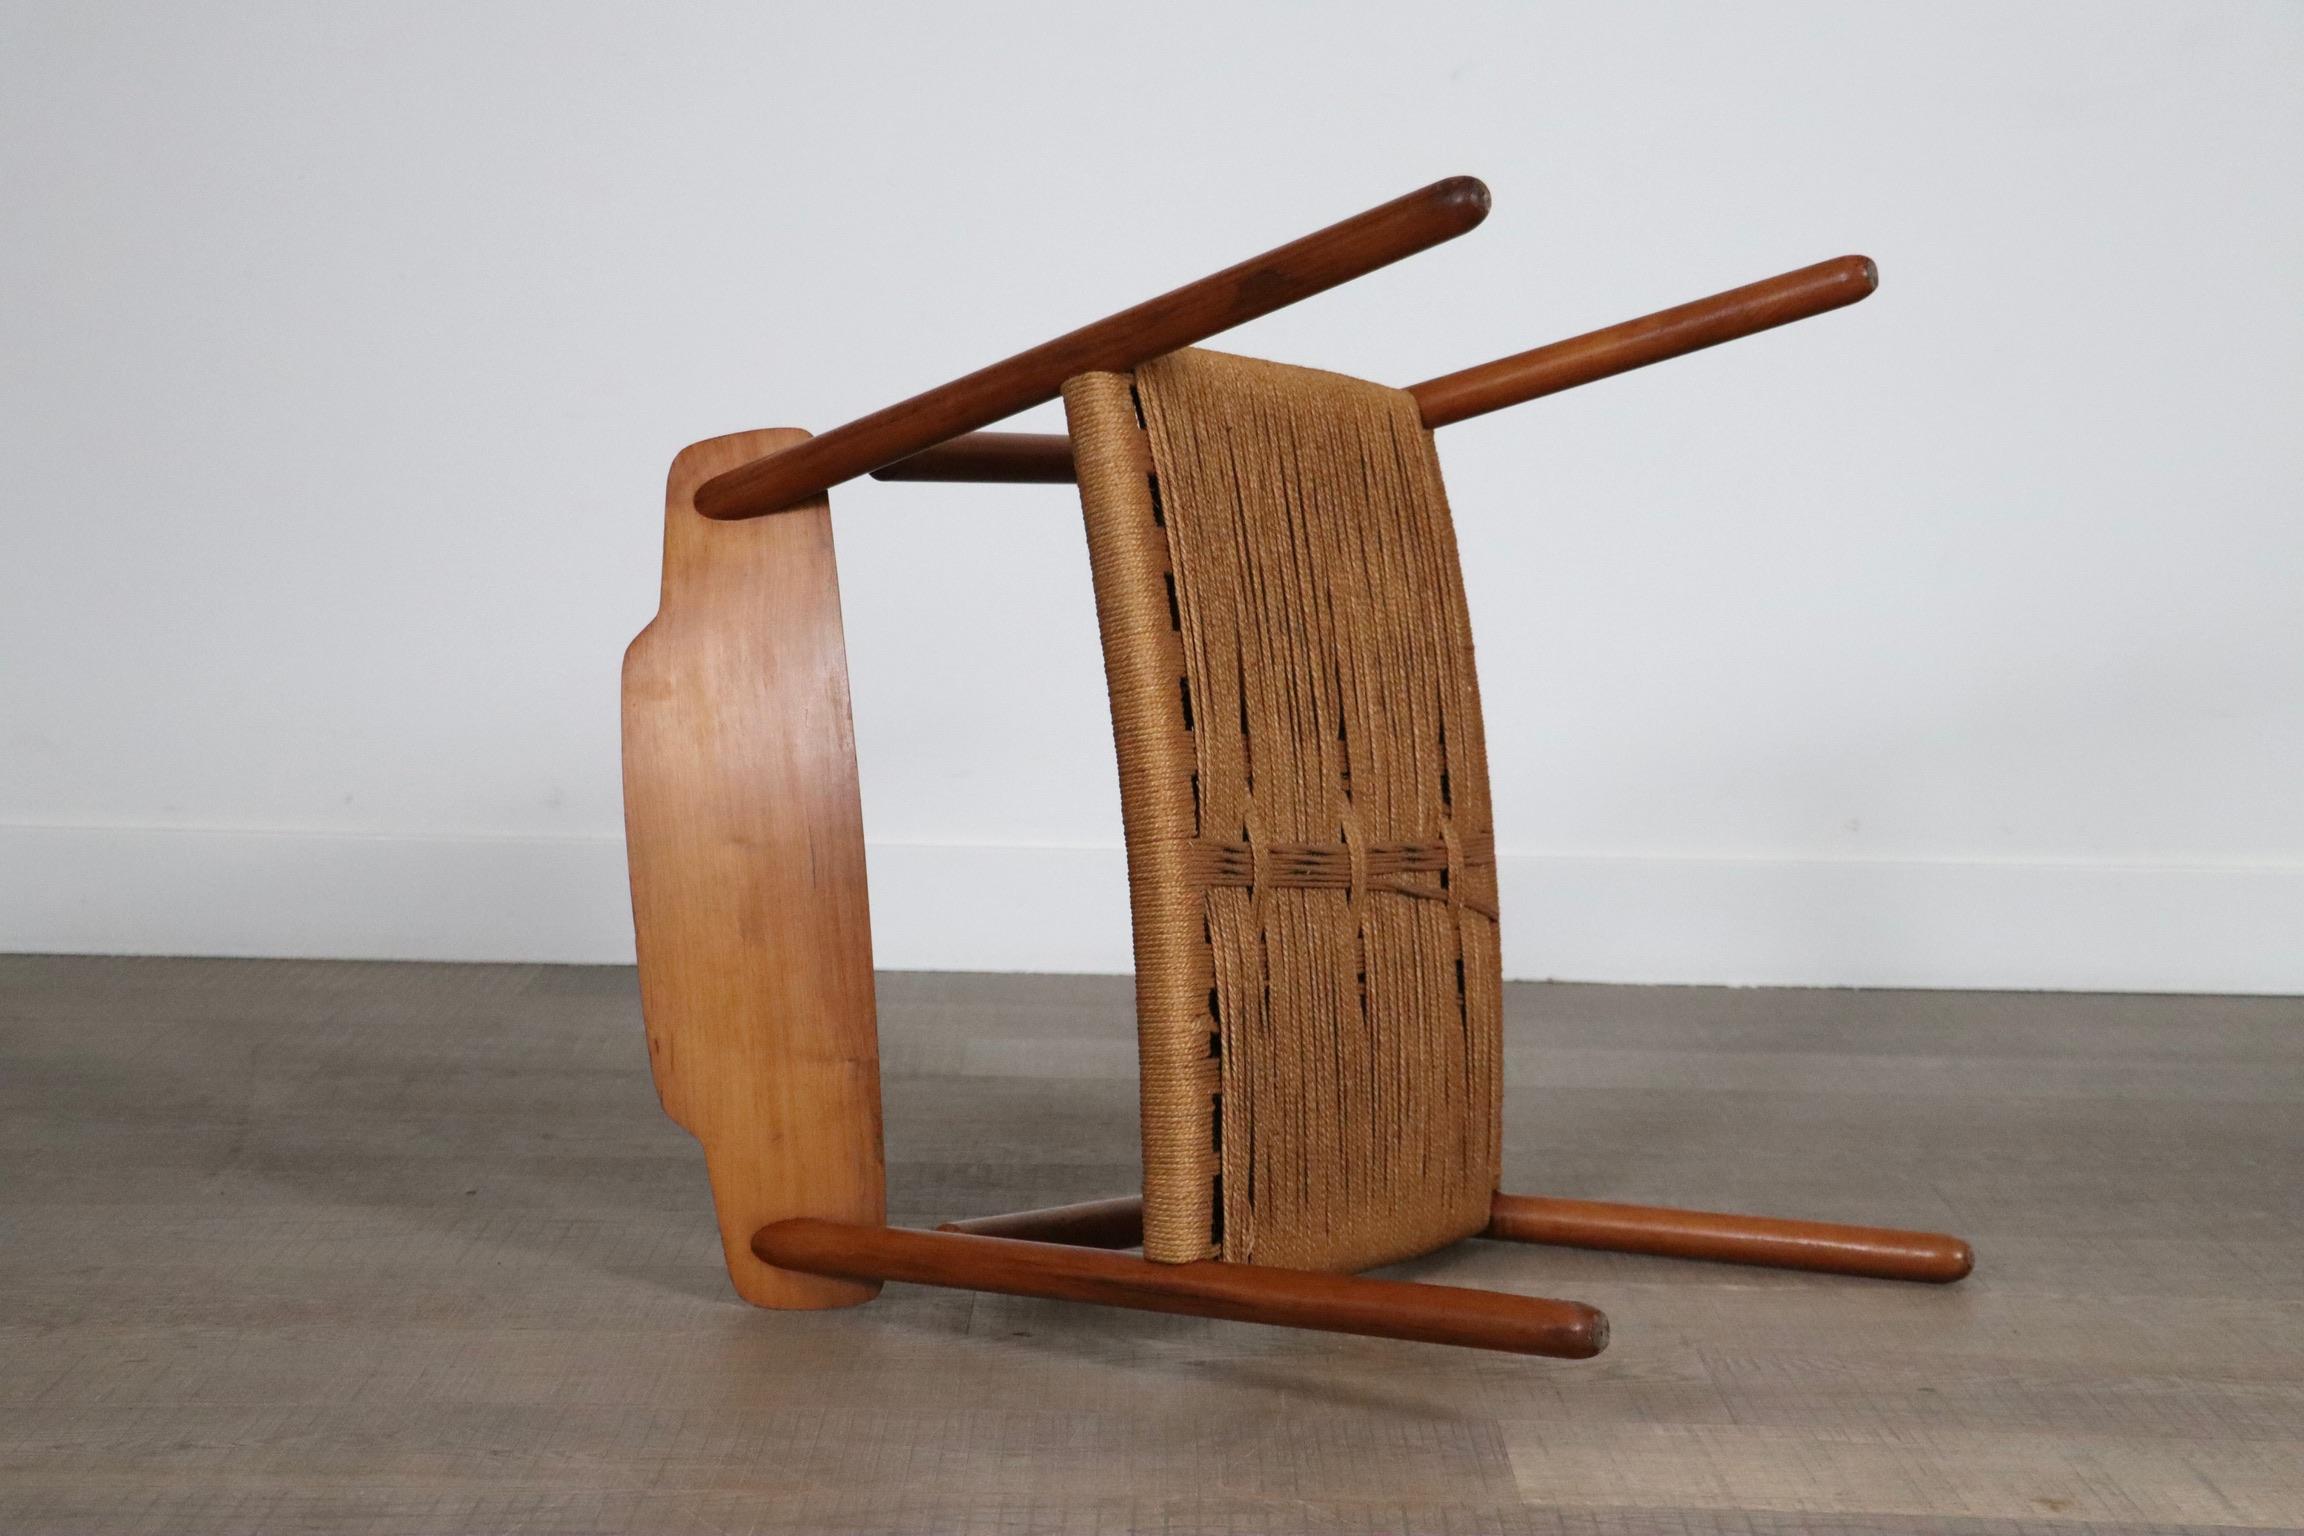 Midcentury Minimalistic Easy Chair In Oak And Papercord, Finland 1950s For Sale 8